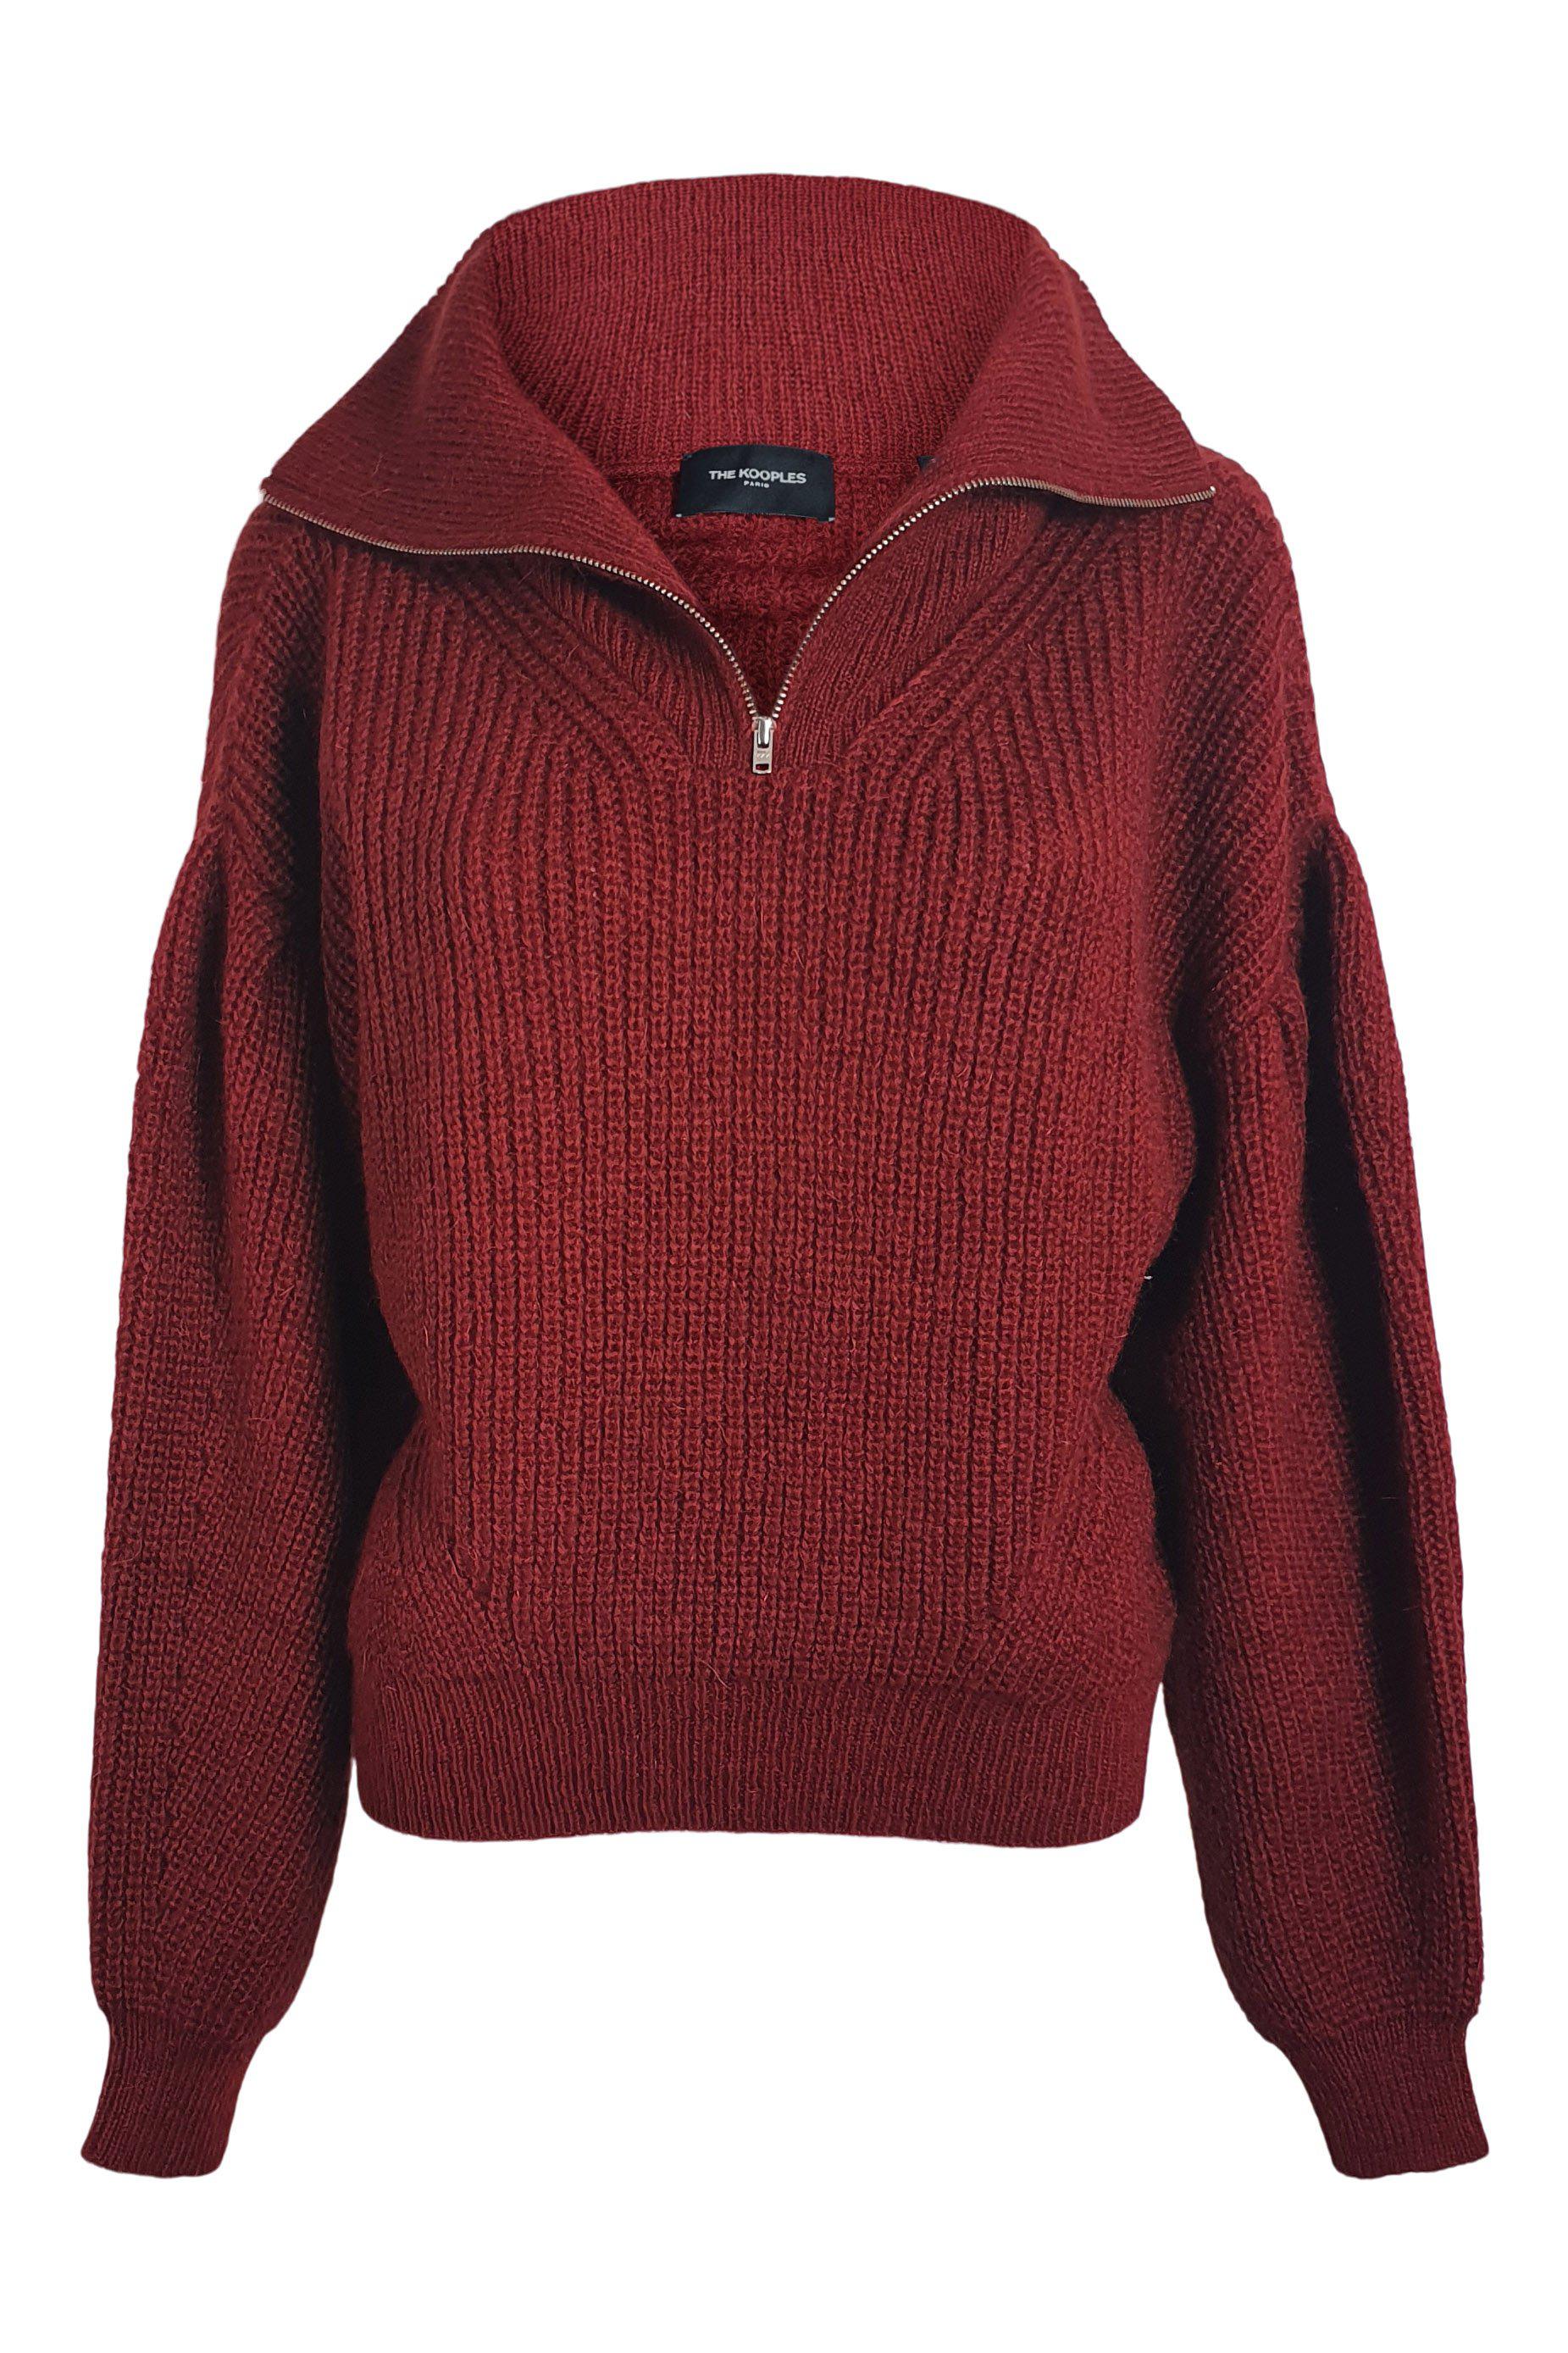 THE KOOPLES Red Mix Cable Knit Zipped Roll Neck Jumper (2 | UK 12 | EU 38)-The Freperie